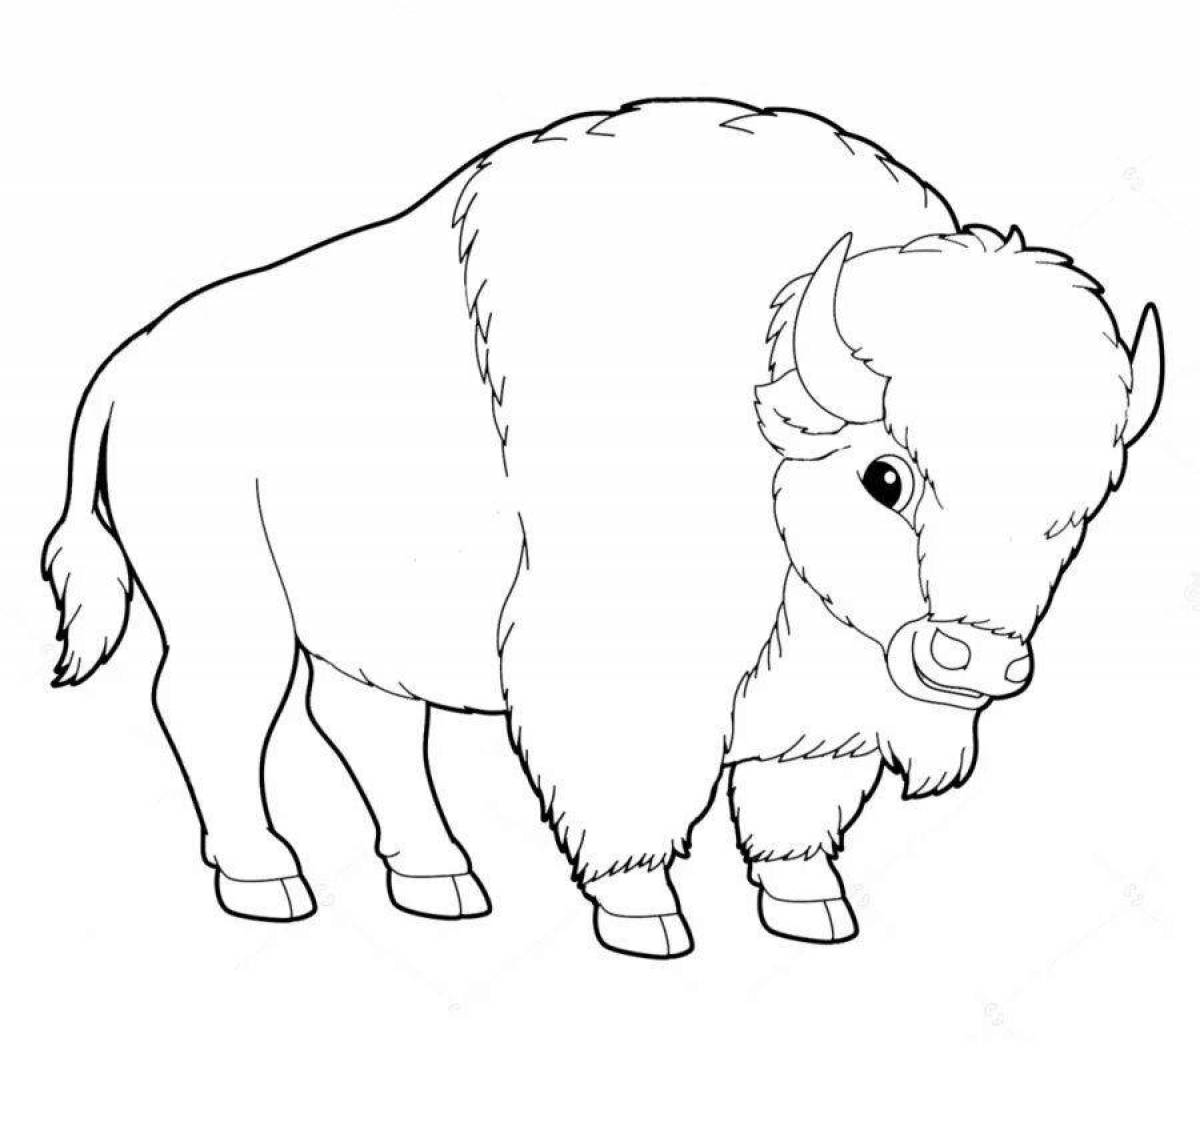 Dazzling bison coloring book for kids